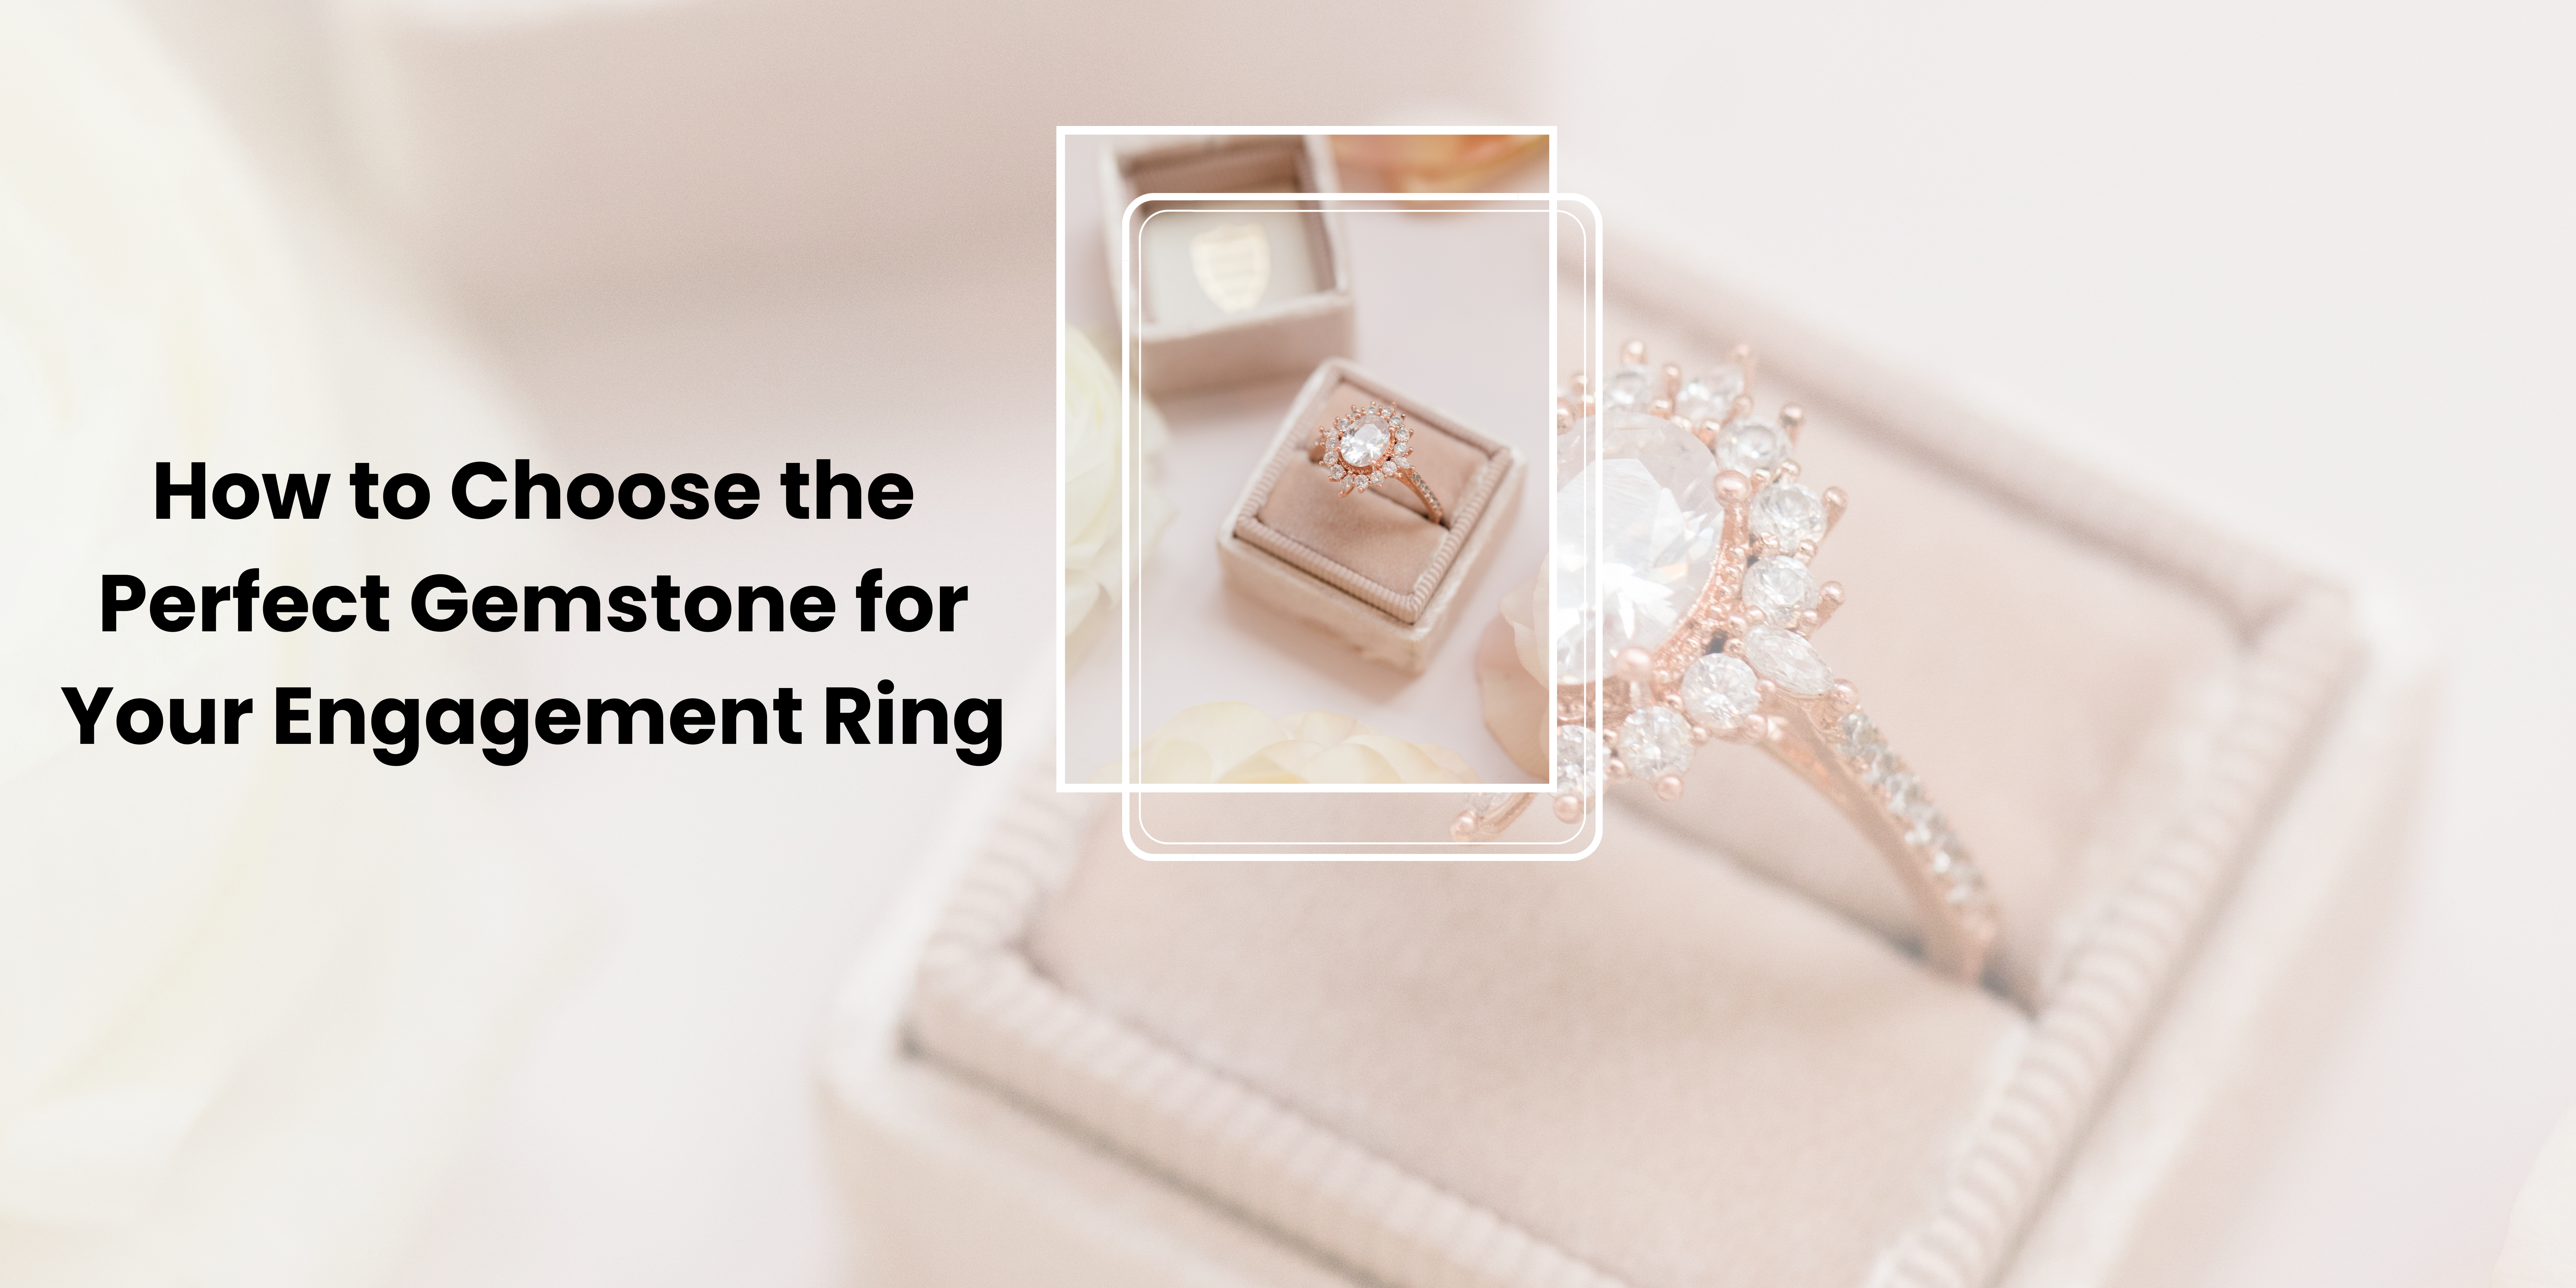 How to Choose the Perfect Gemstone for Your Engagement Ring